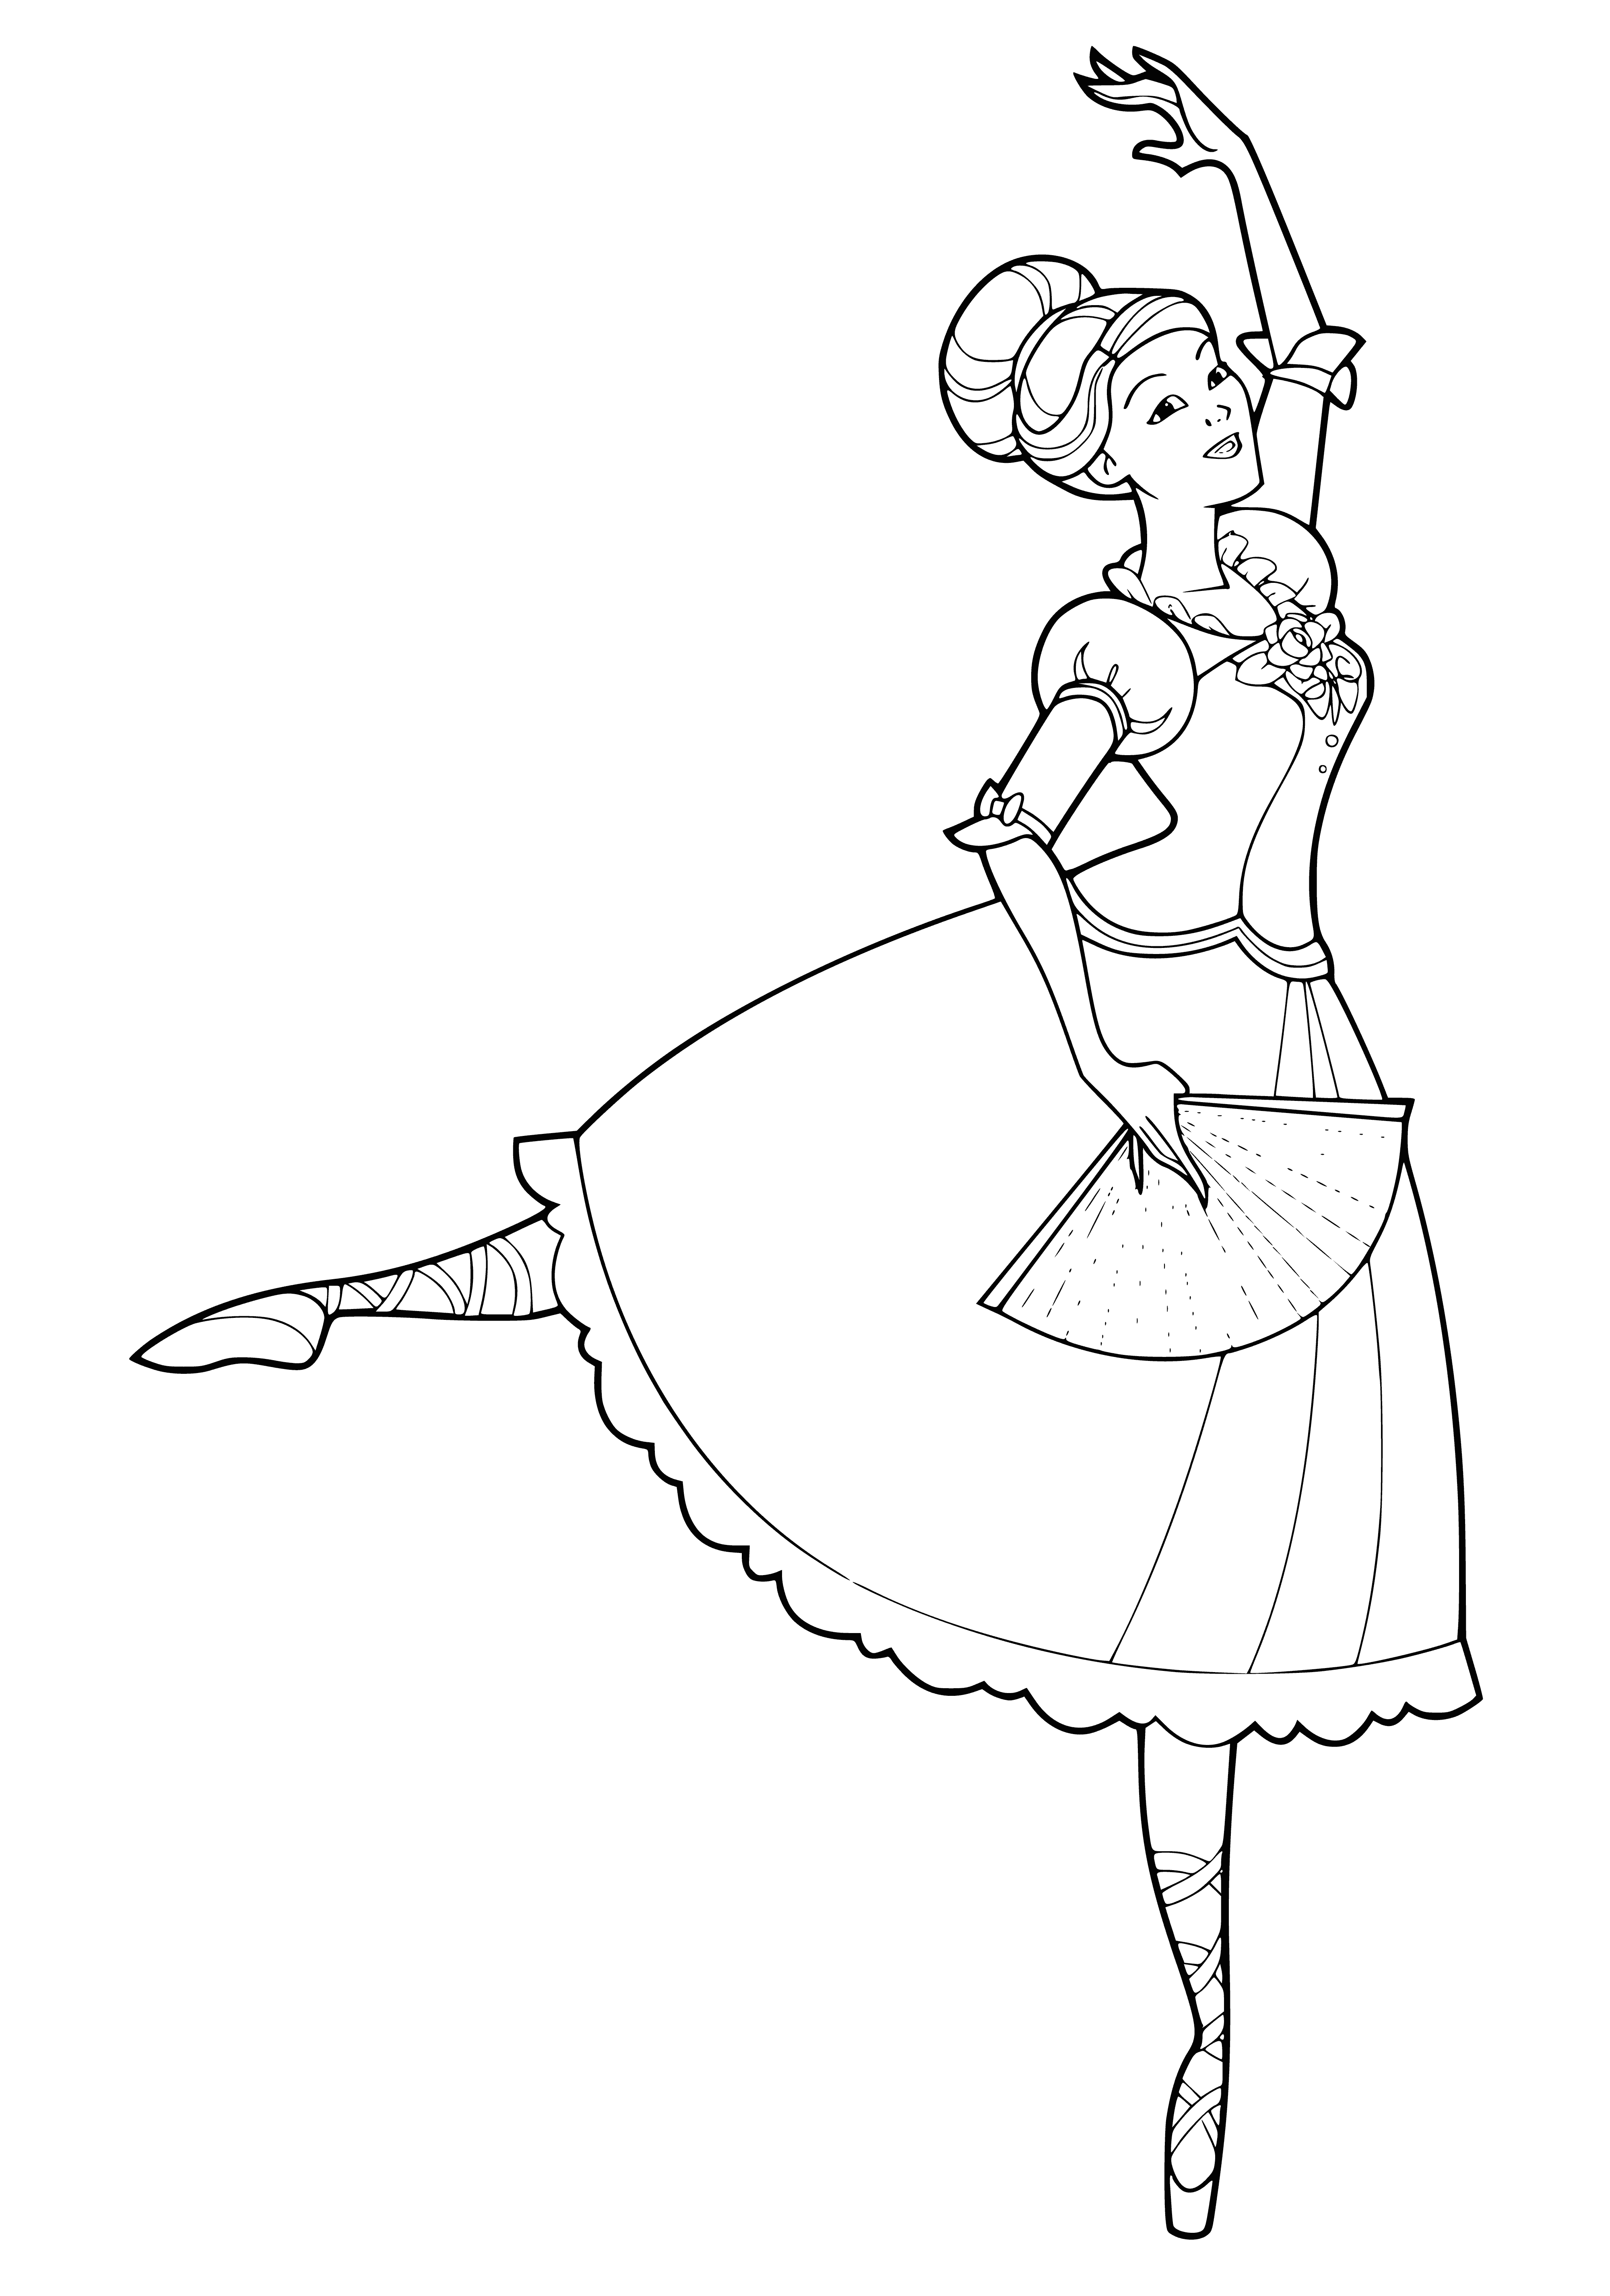 Ballerina with a fan coloring page